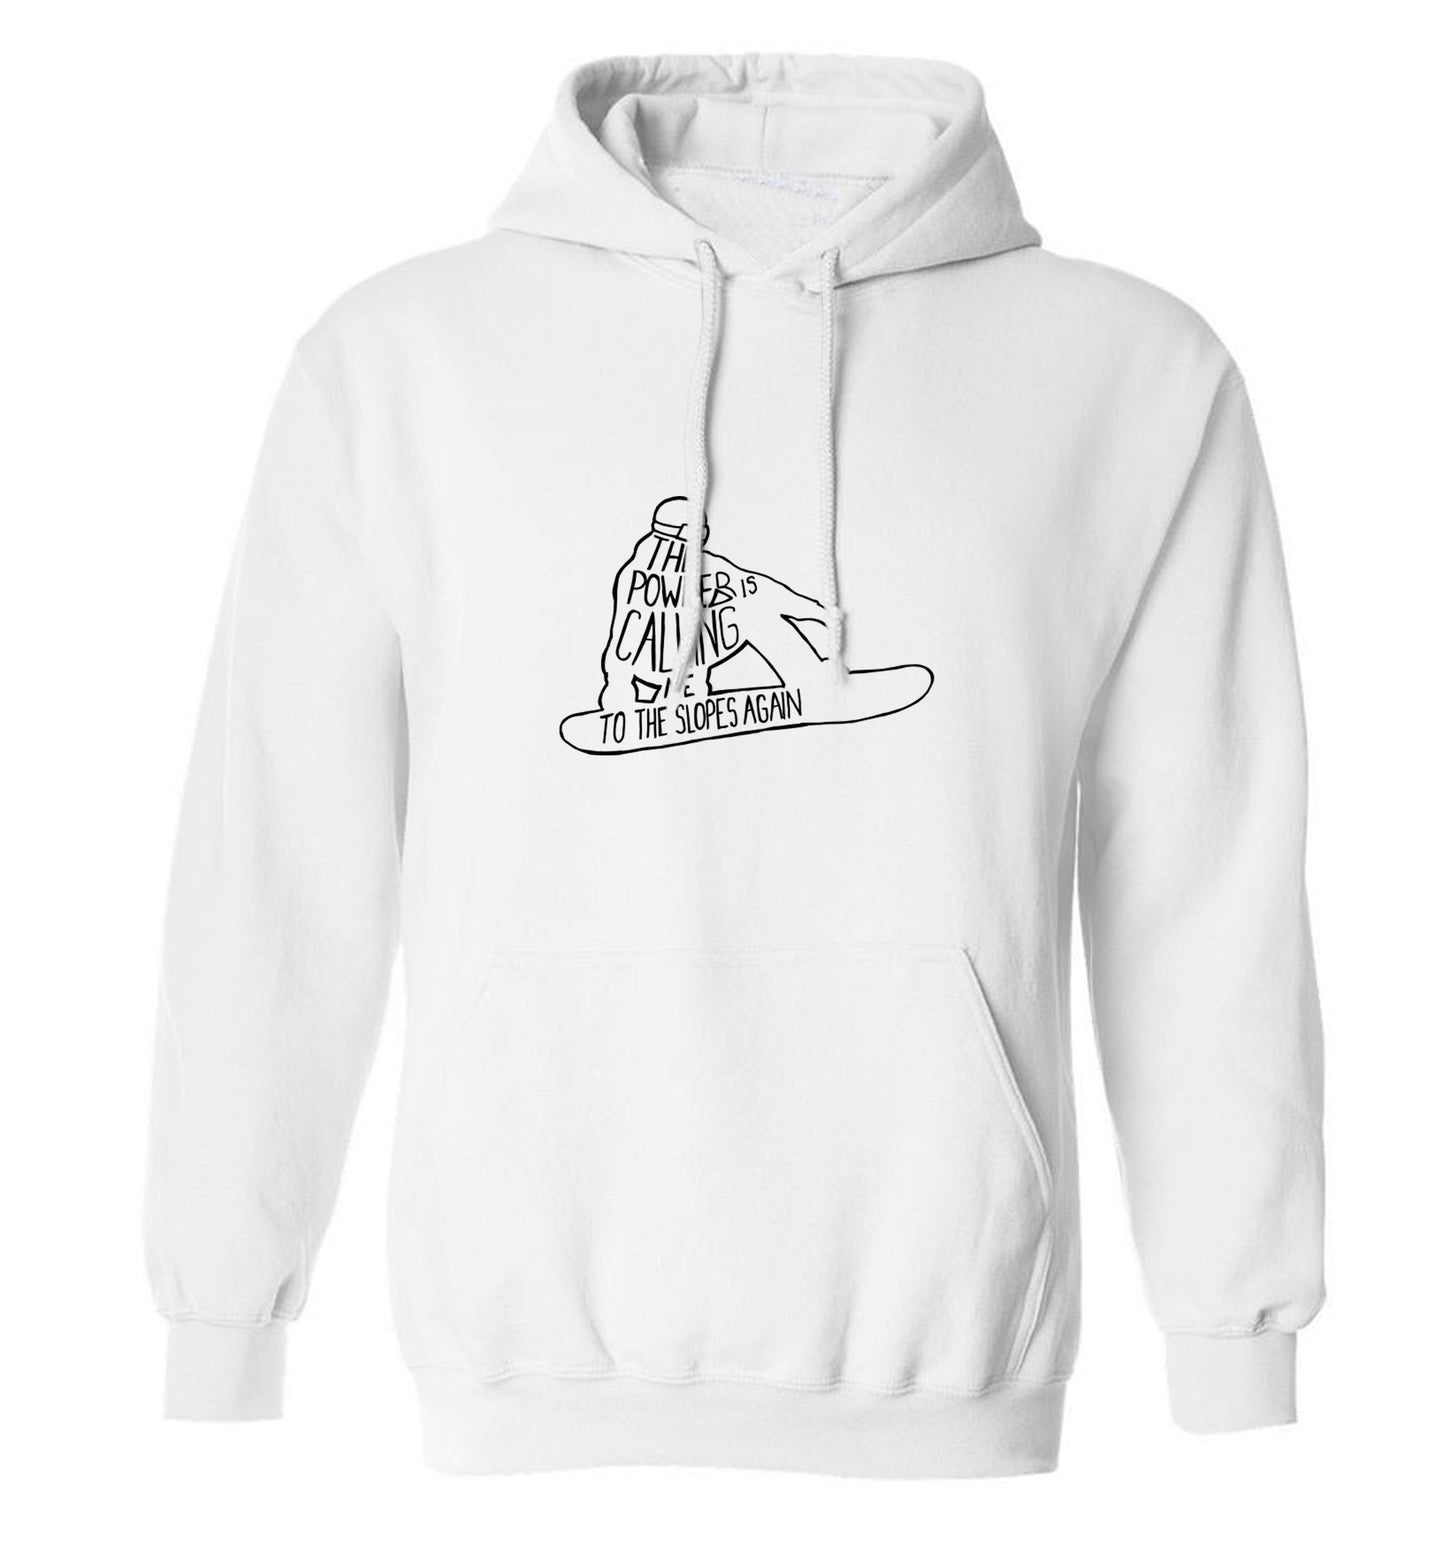 The powder is calling me to the slopes again adults unisex white hoodie 2XL